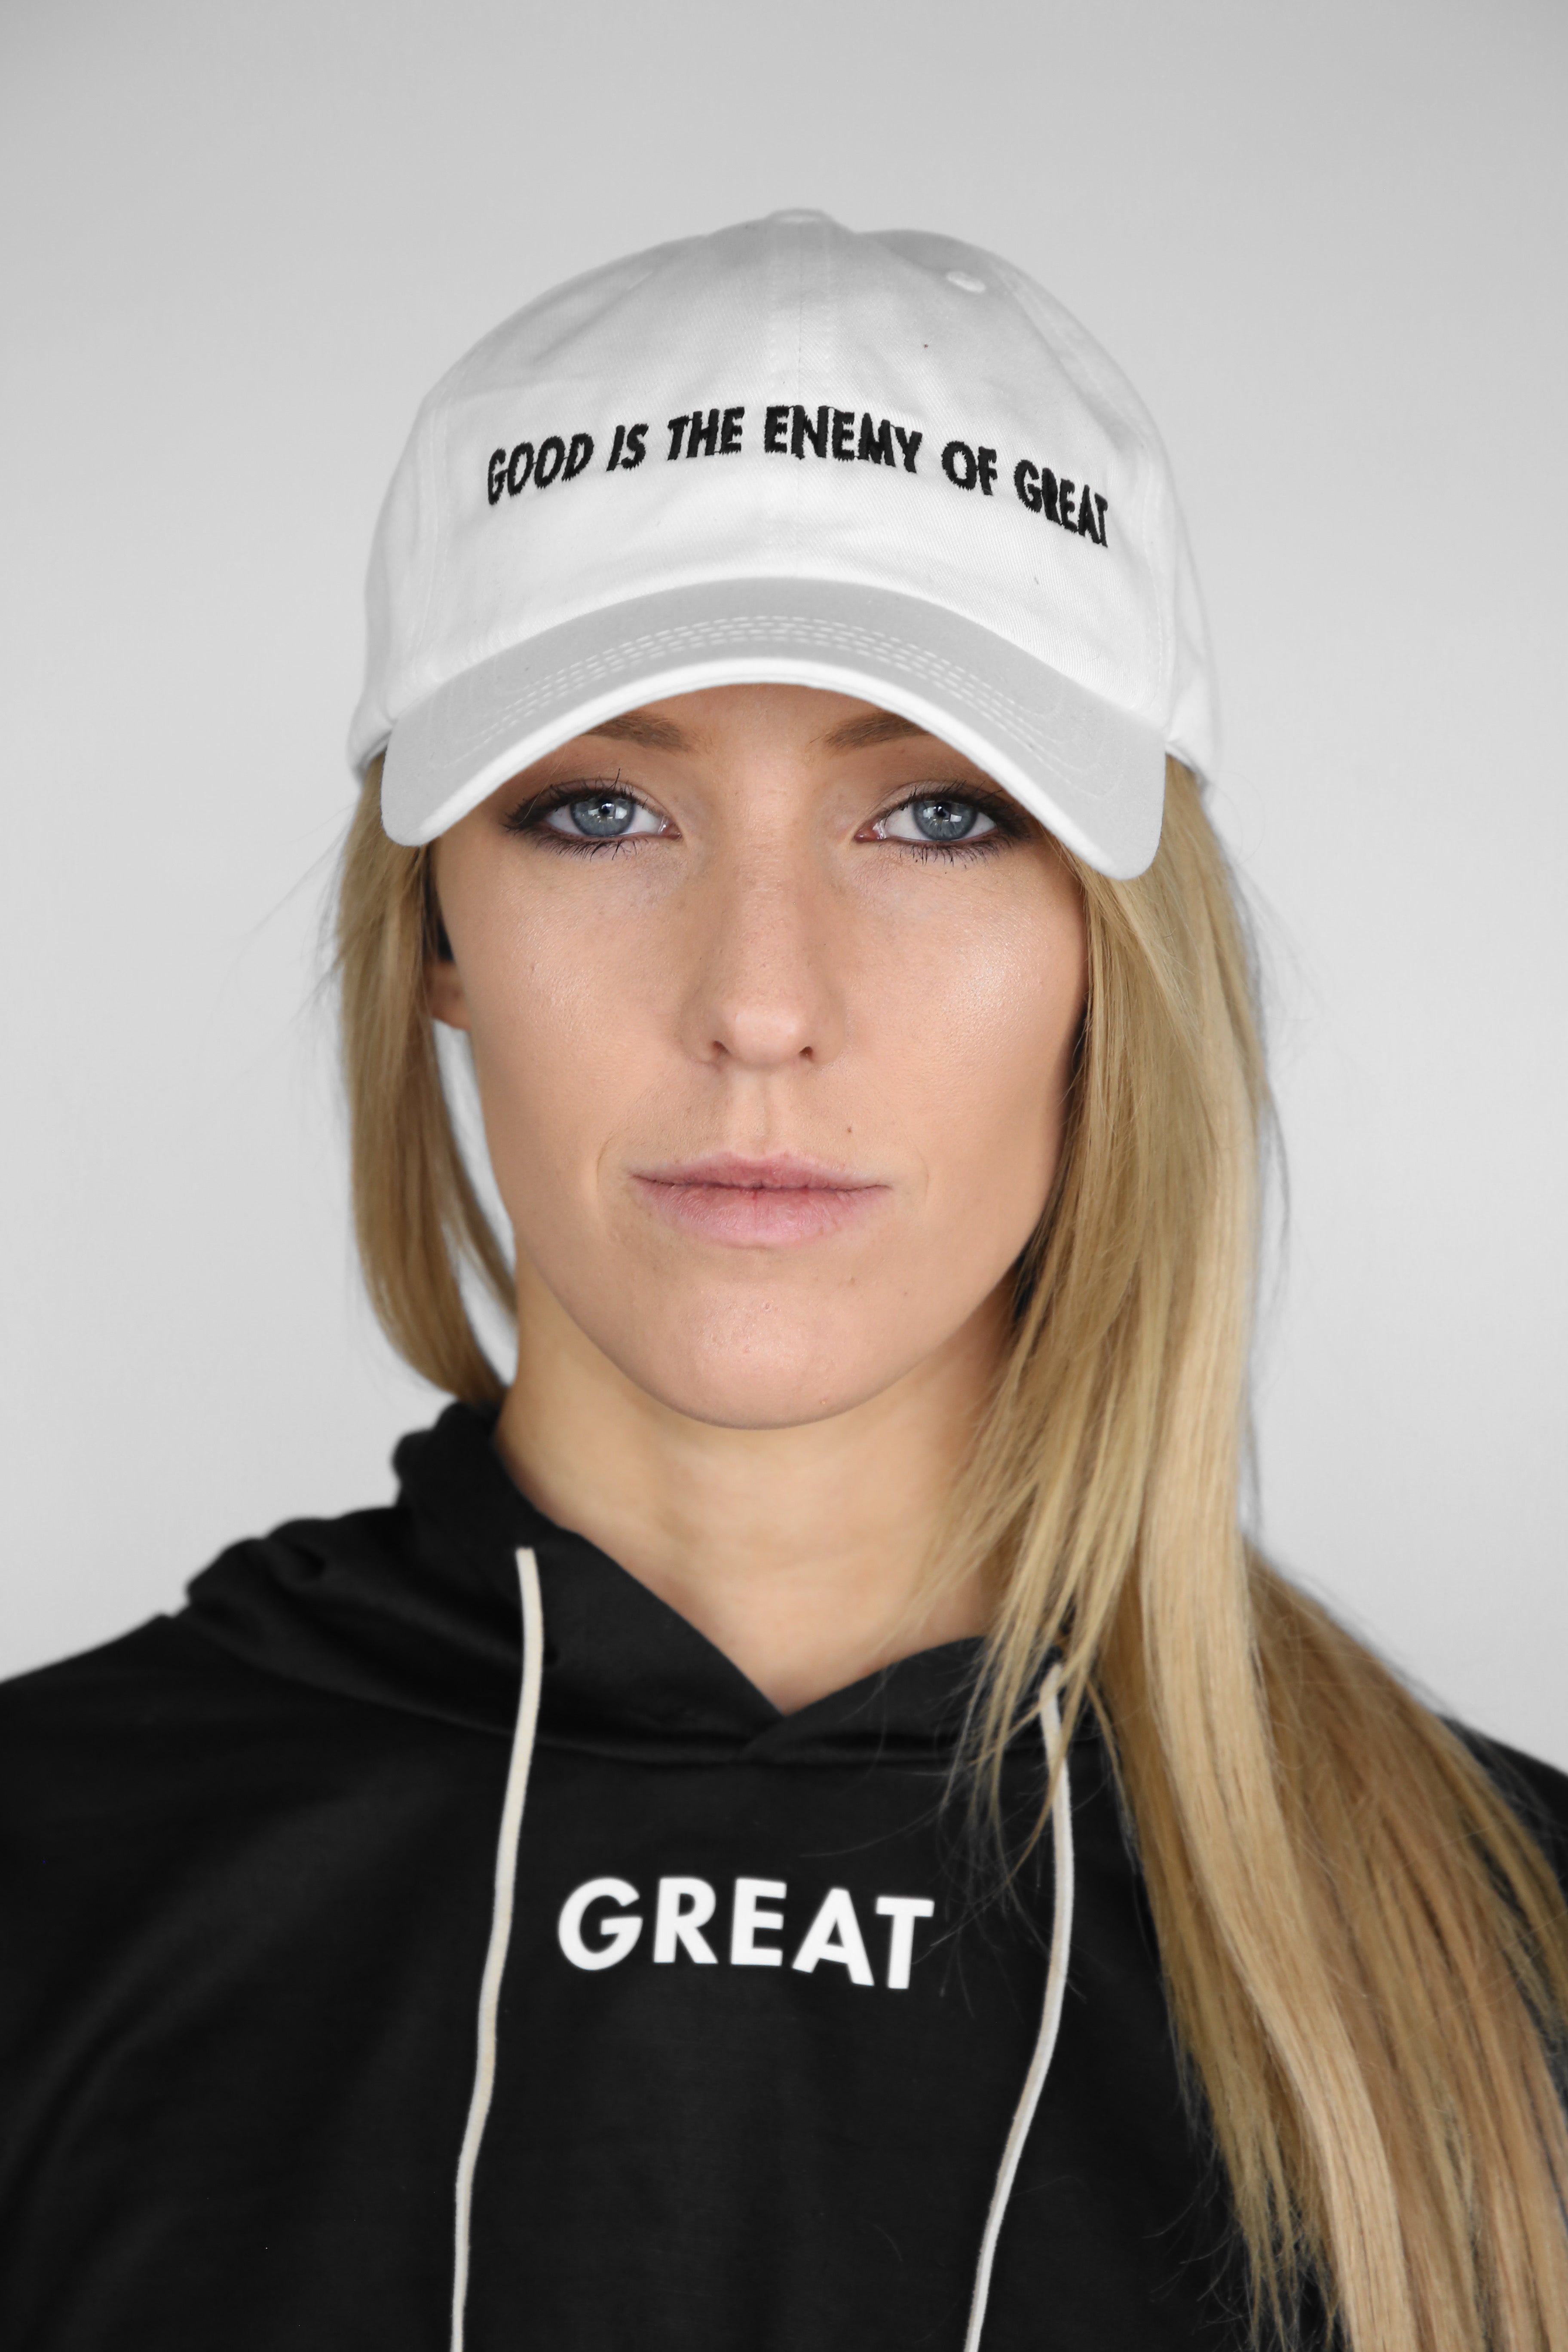 Good Is The Enemy Hat